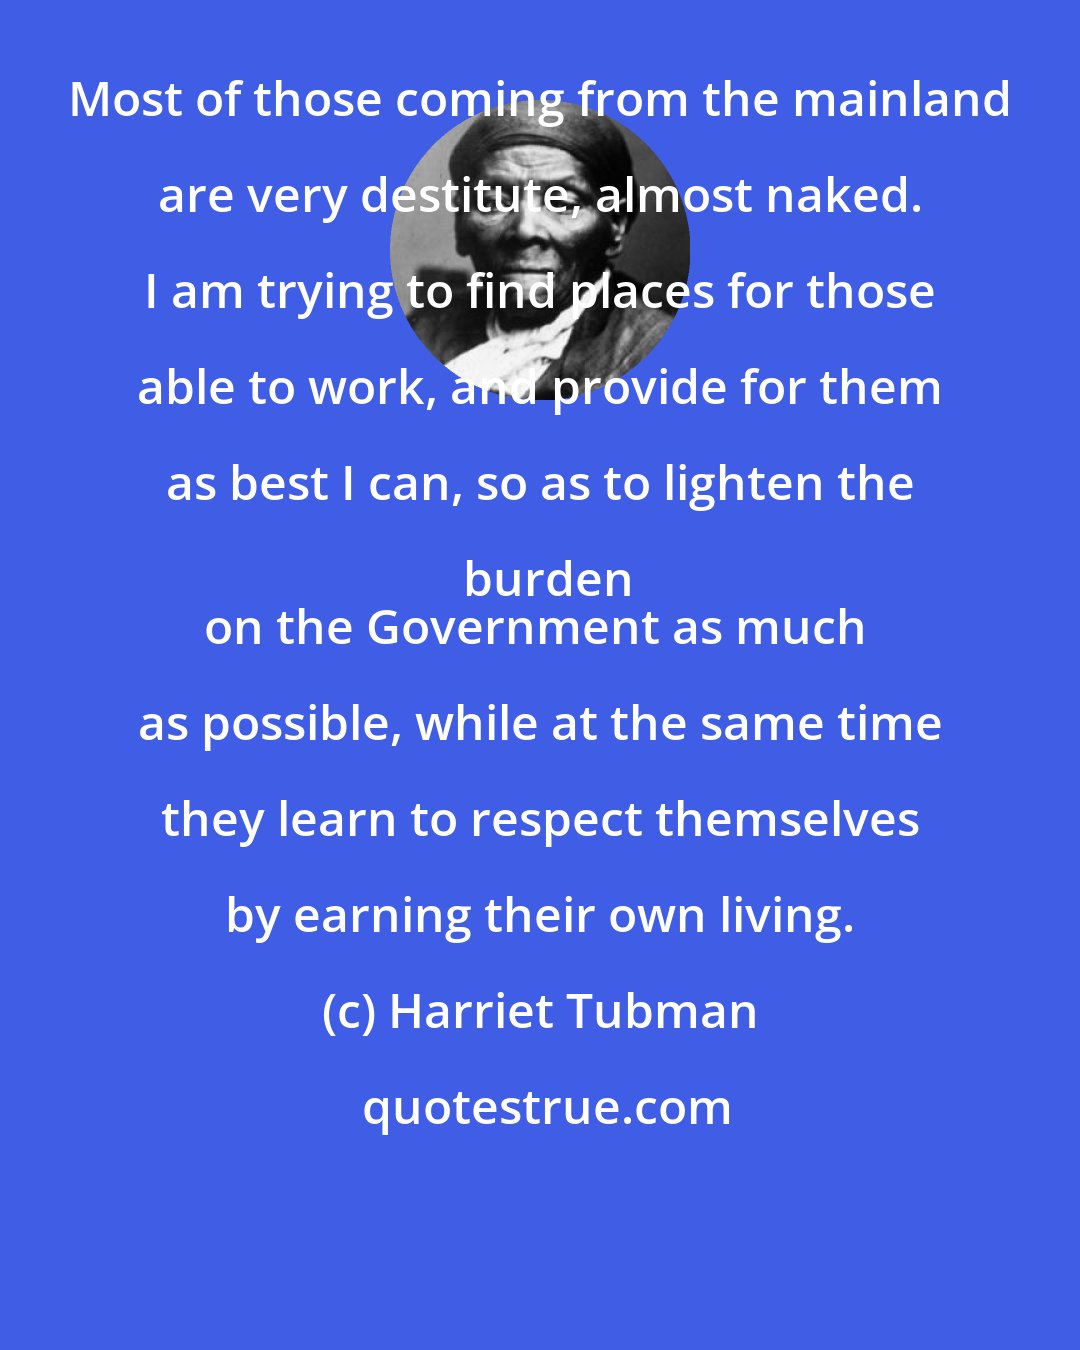 Harriet Tubman: Most of those coming from the mainland are very destitute, almost naked. I am trying to find places for those able to work, and provide for them as best I can, so as to lighten the burden
on the Government as much as possible, while at the same time they learn to respect themselves by earning their own living.